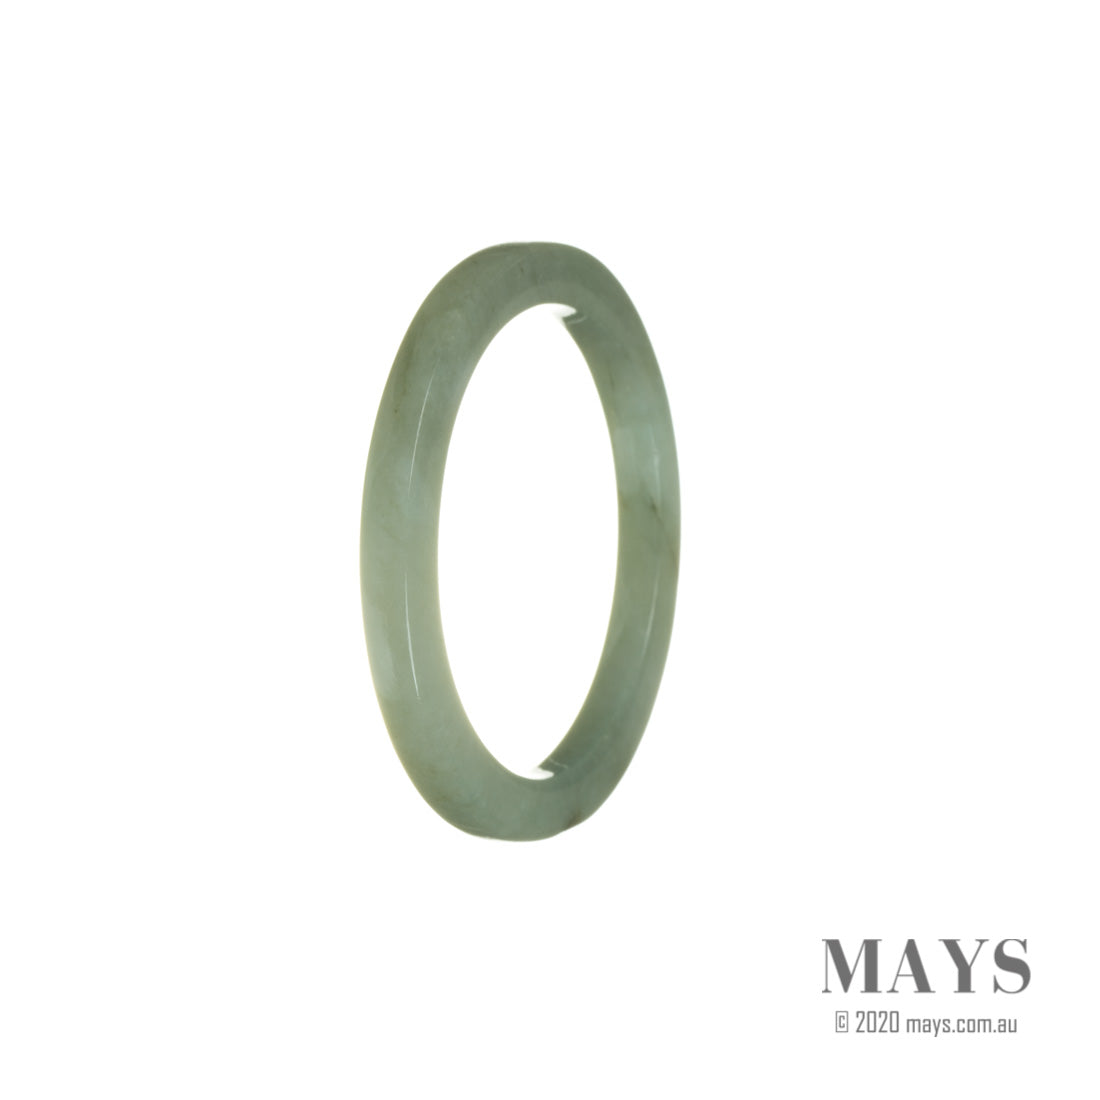 A close-up photo of a beautiful green jade bangle, oval in shape and measuring 53mm in diameter. The jade appears untreated and has a natural, authentic look. It is a stunning piece of jewelry from the brand MAYS.